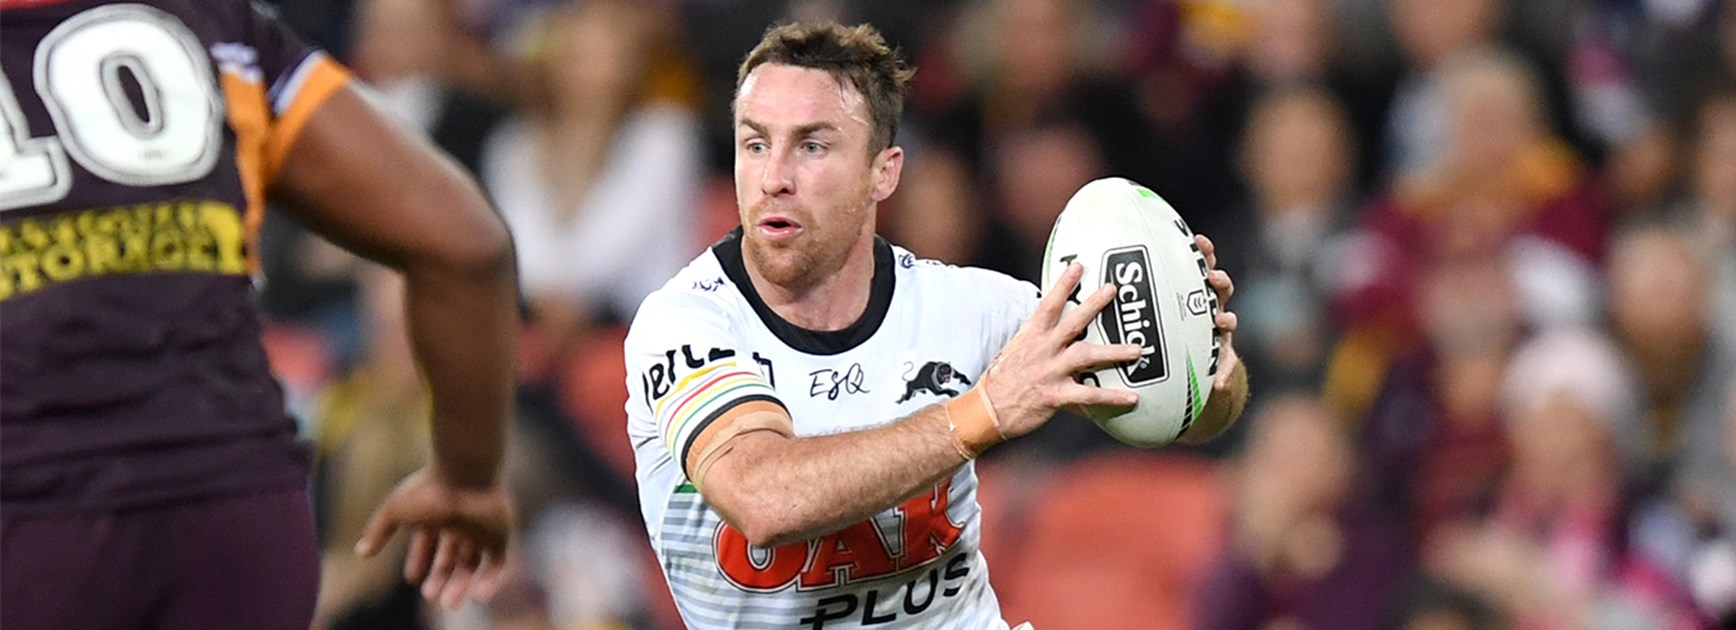 Maloney 'filthy' about dangerous tackle in Broncos defeat